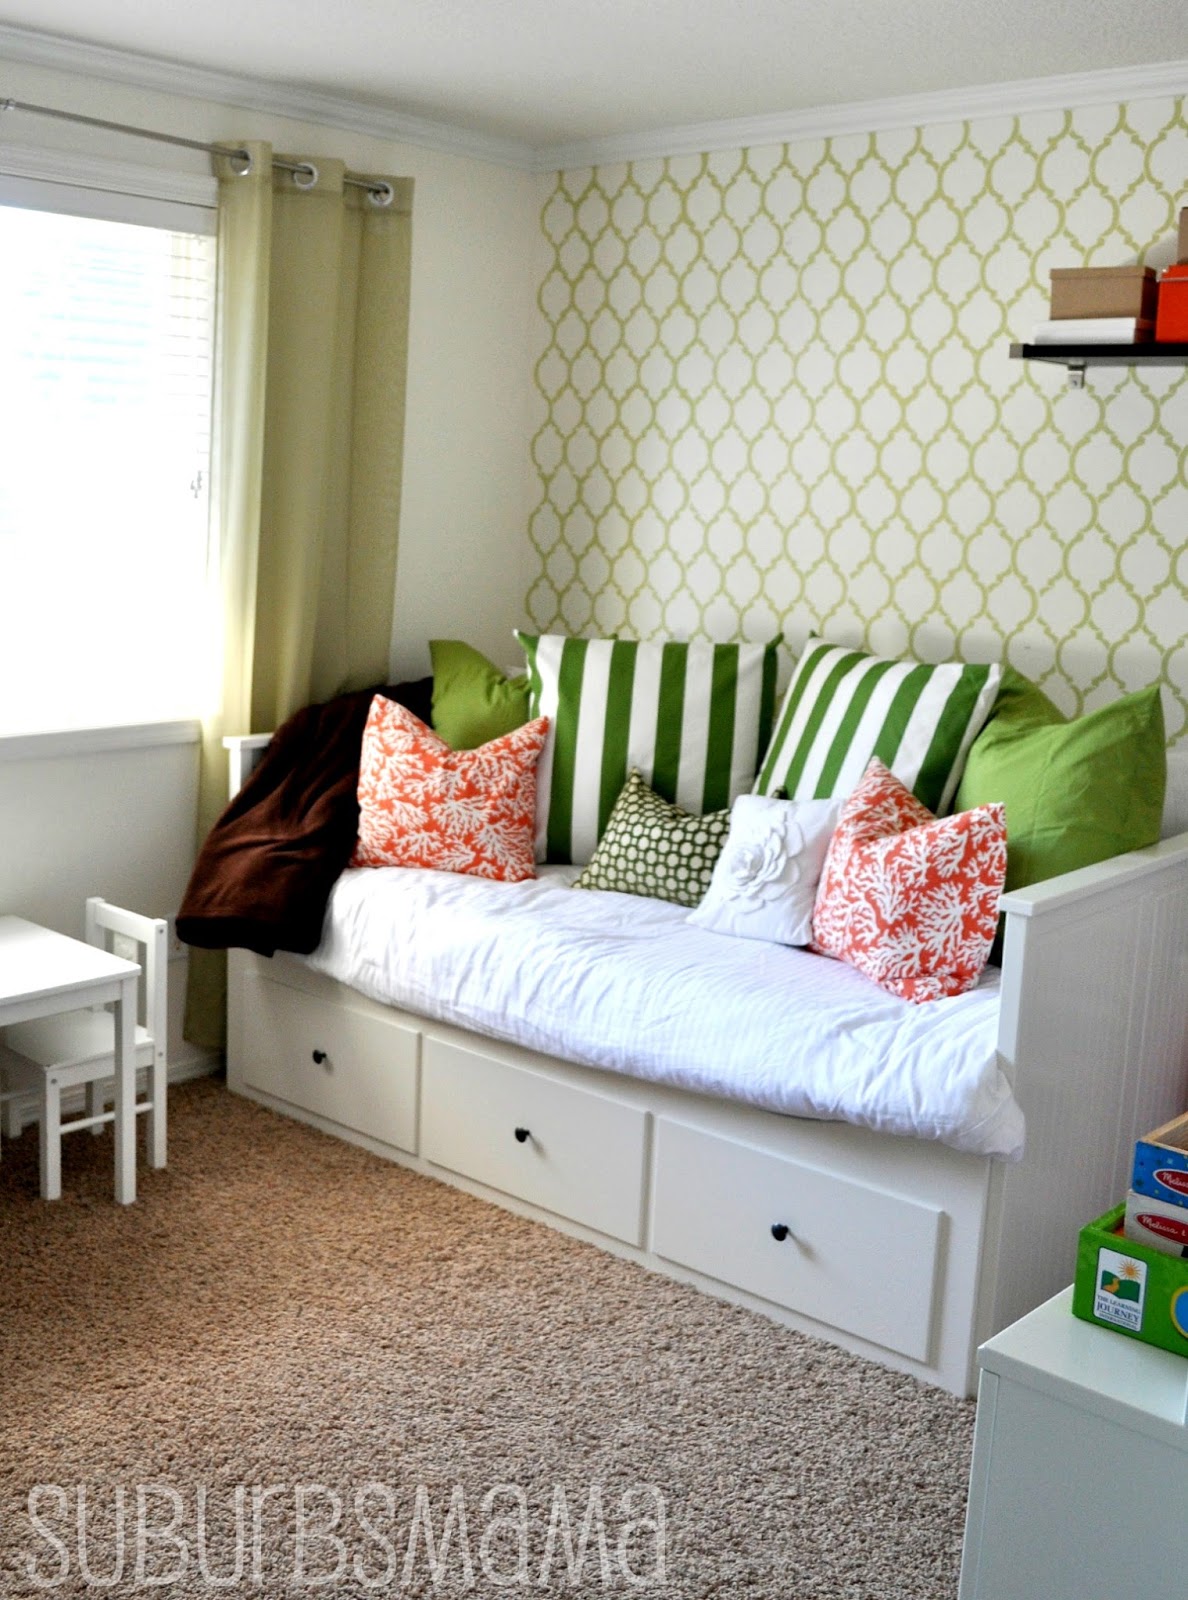 Unique Playroom And Guest Room Ideas for Small Space